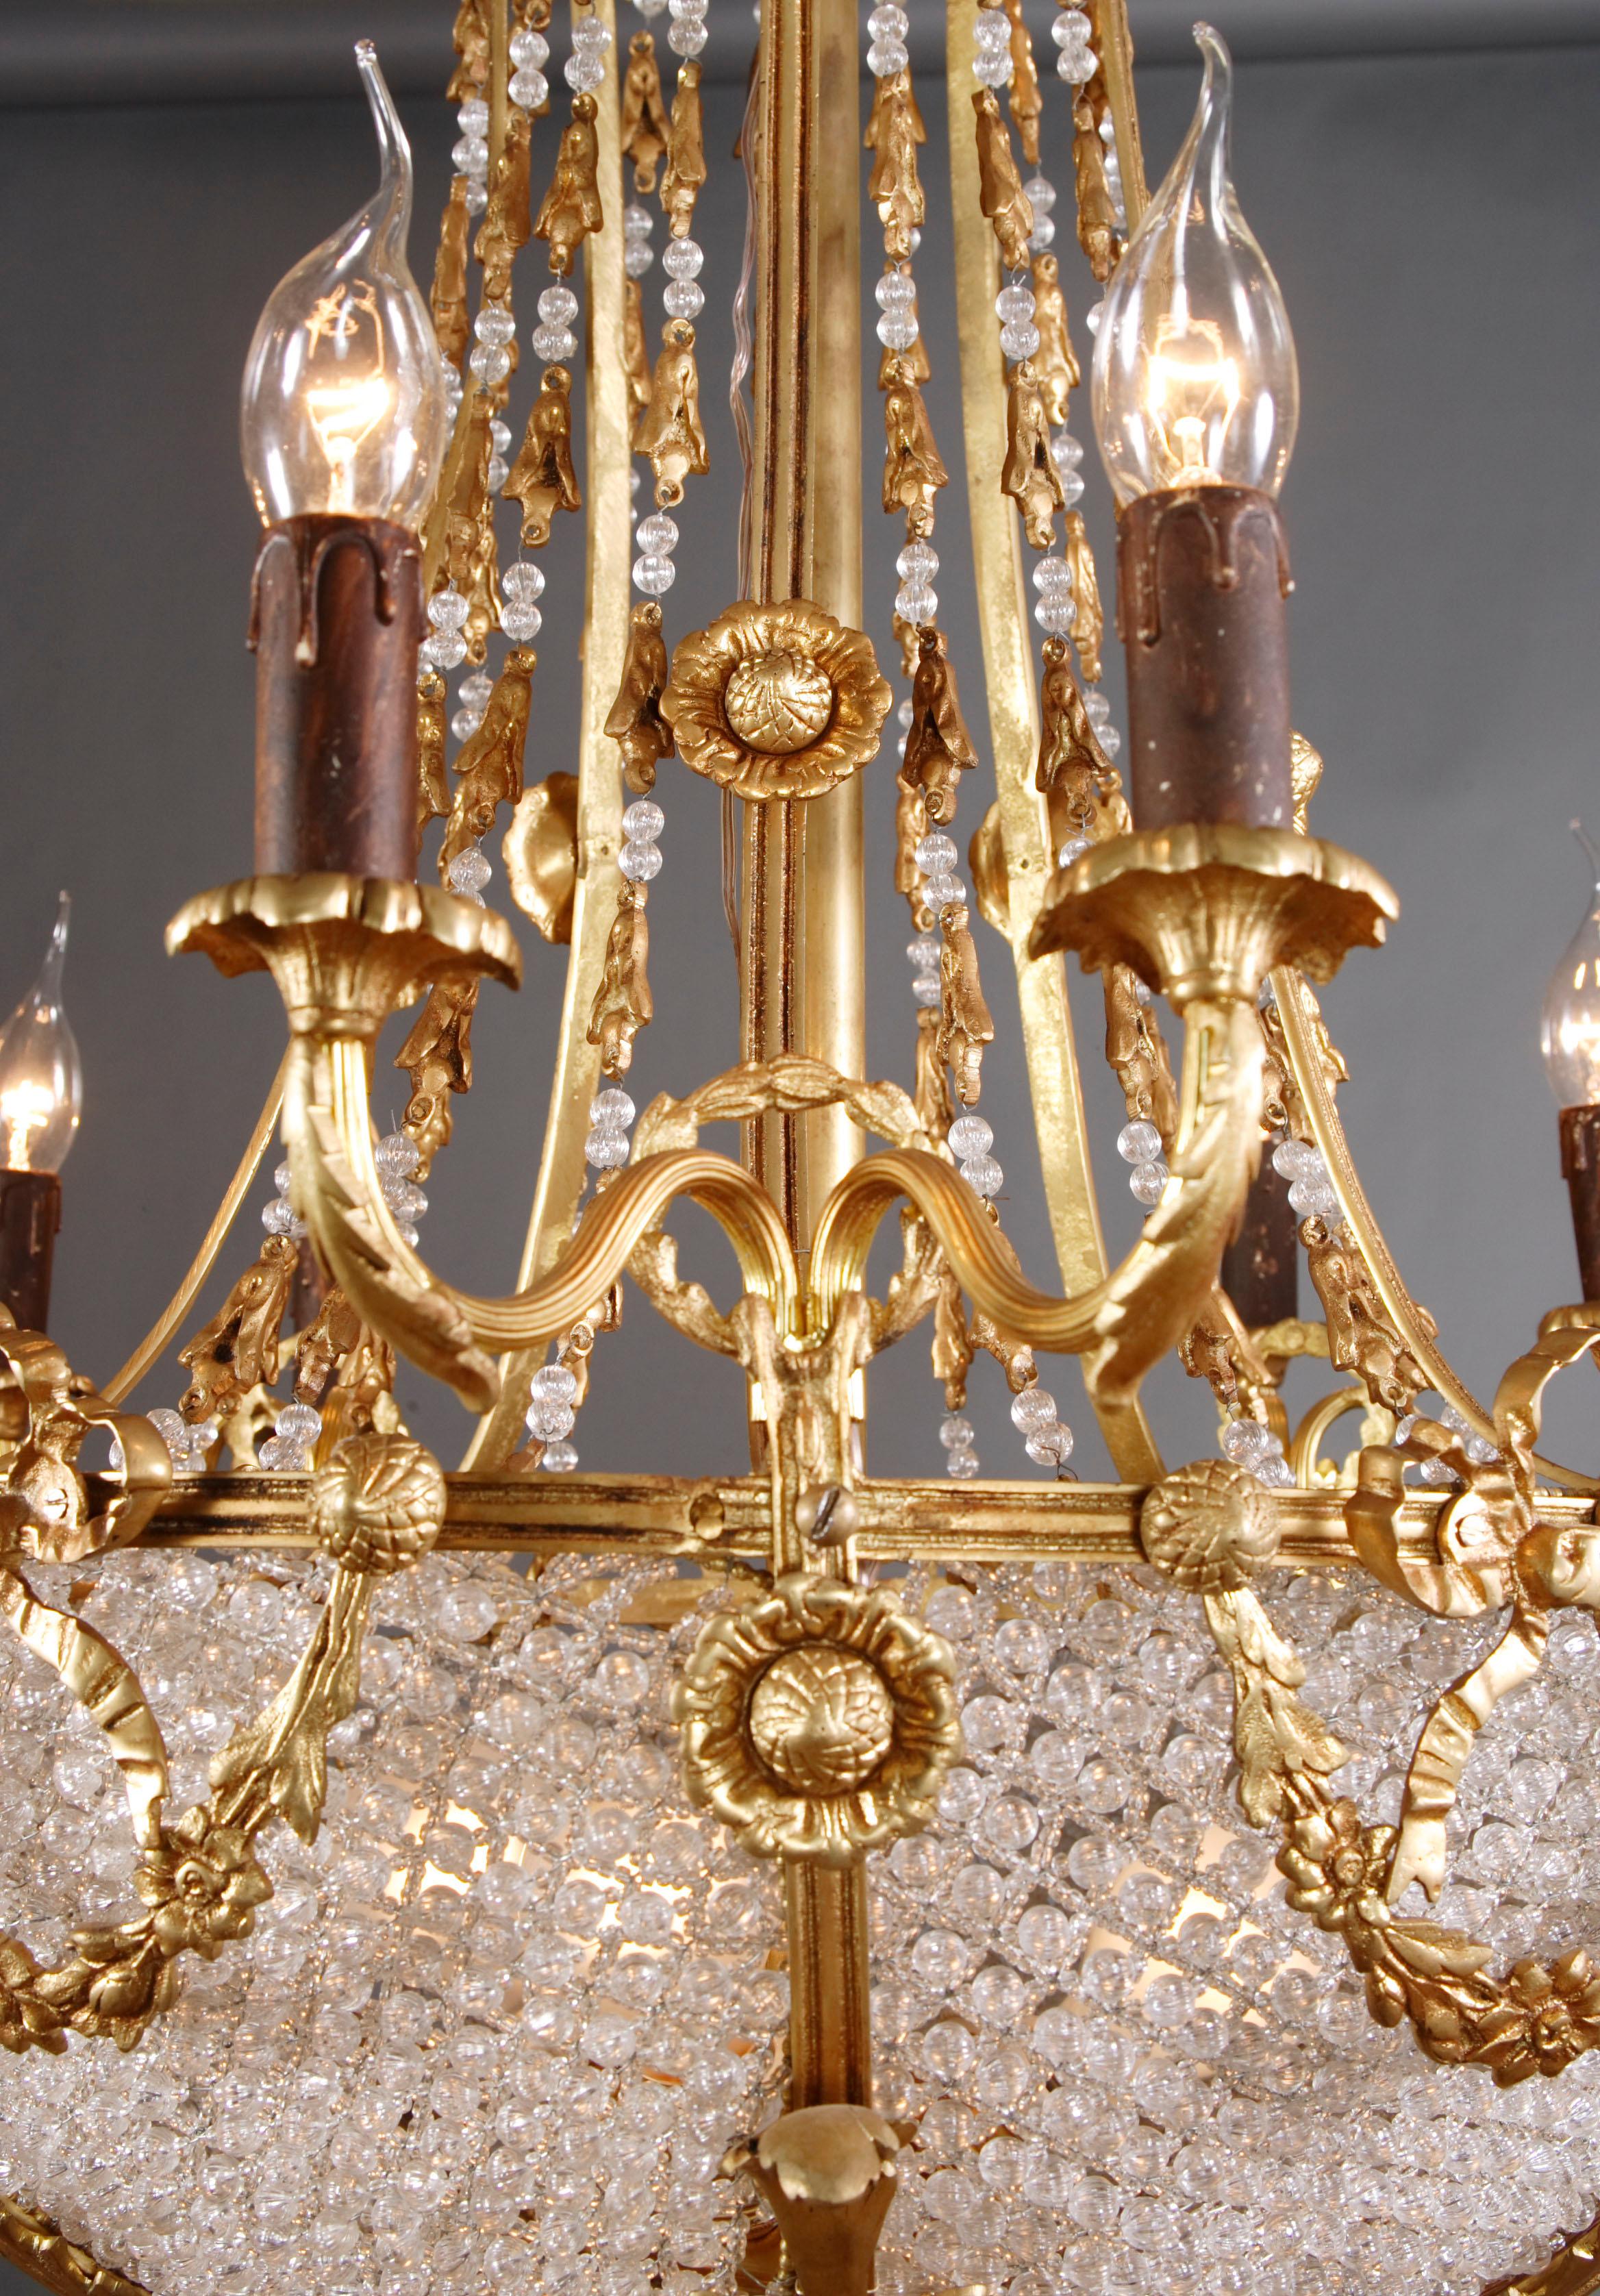 Ceiling candelabra in Louis XVI Style
 Profile framed corpus from netted ball prism. Ten light arms.
Measures: Diameter: 64 cm, height: 90 cm.
 